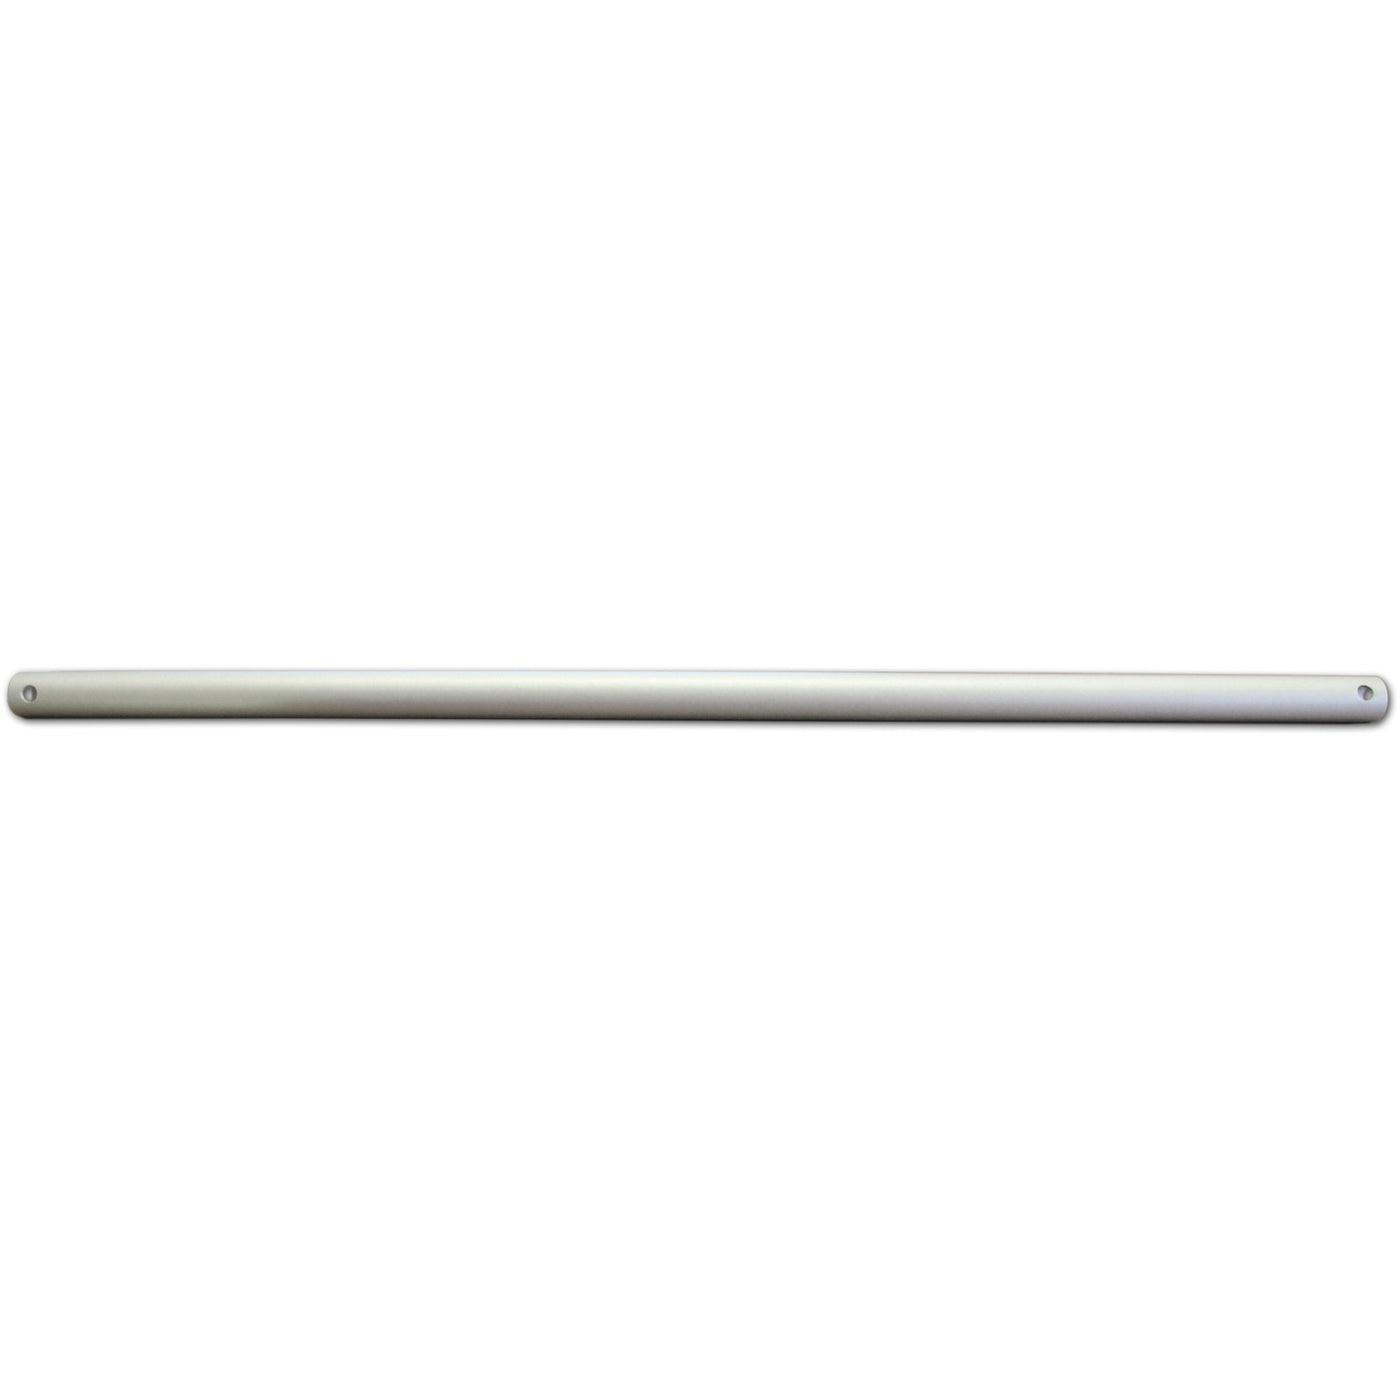 24 in. extension pole in brushed nickel finish.